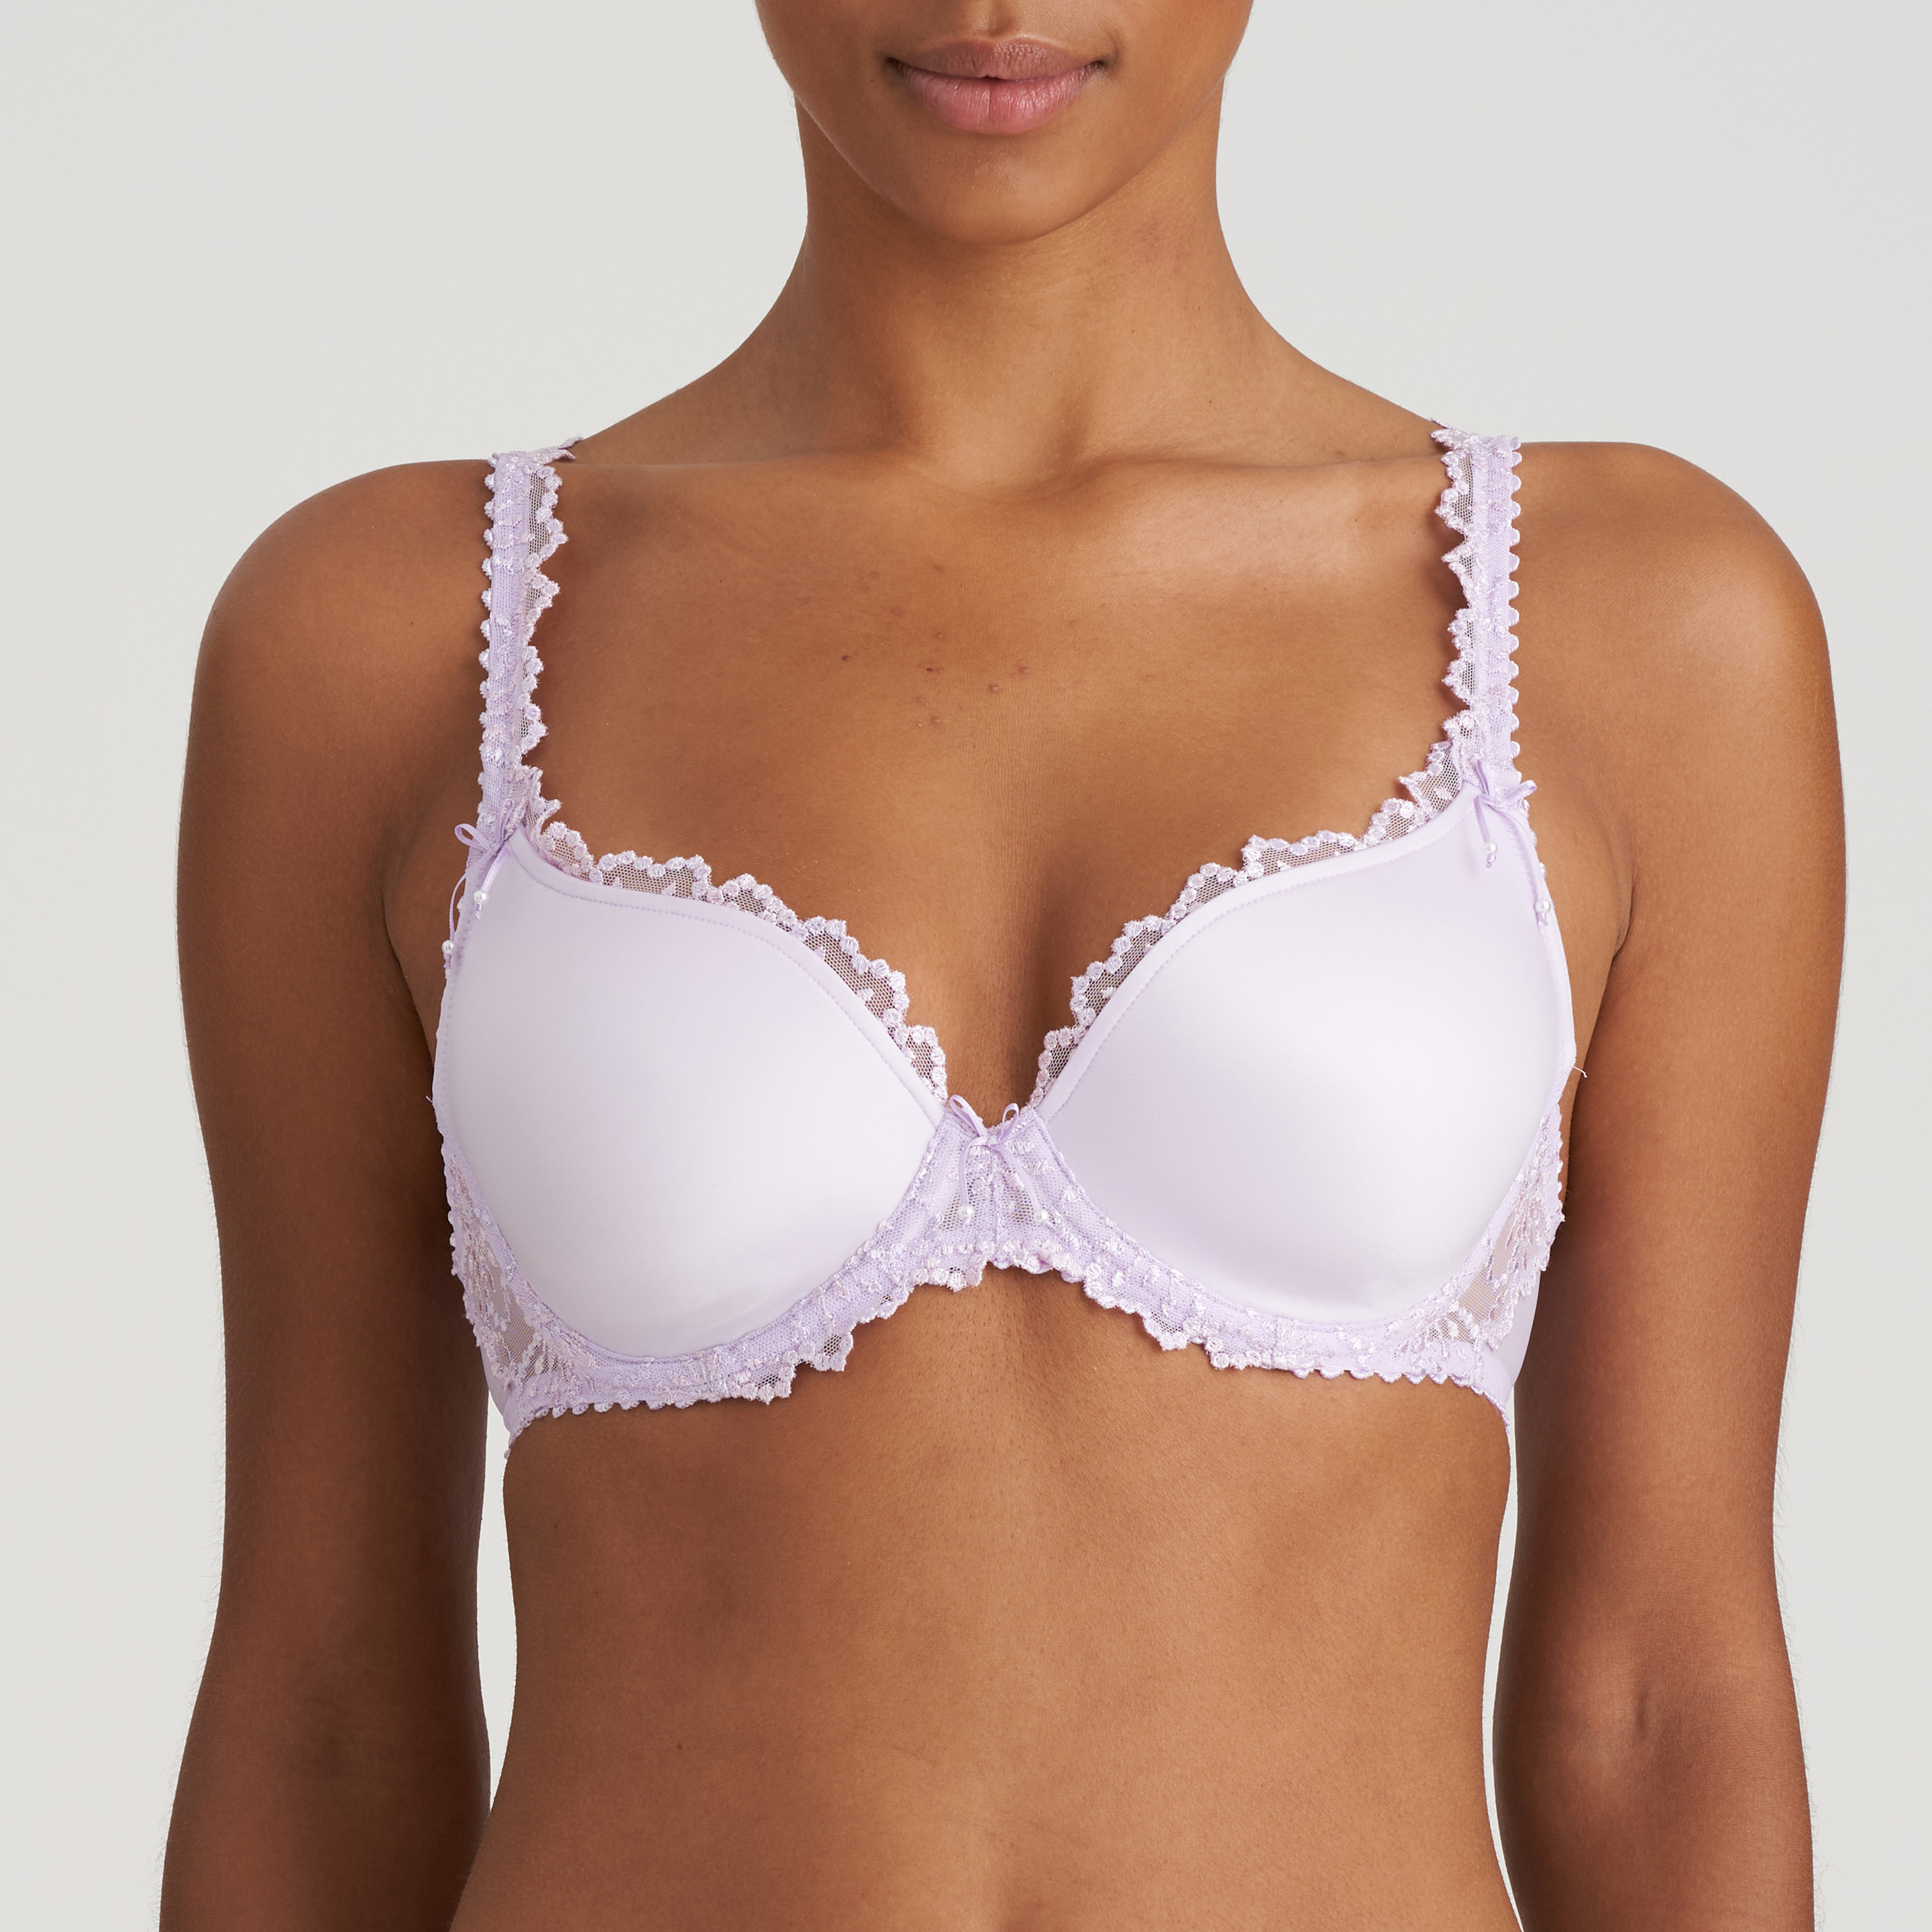 M&S BOUTIQUE HEART EMBROIDERY UNDERWIRED FULL CUP BRA in WHITE MIX Size 34G